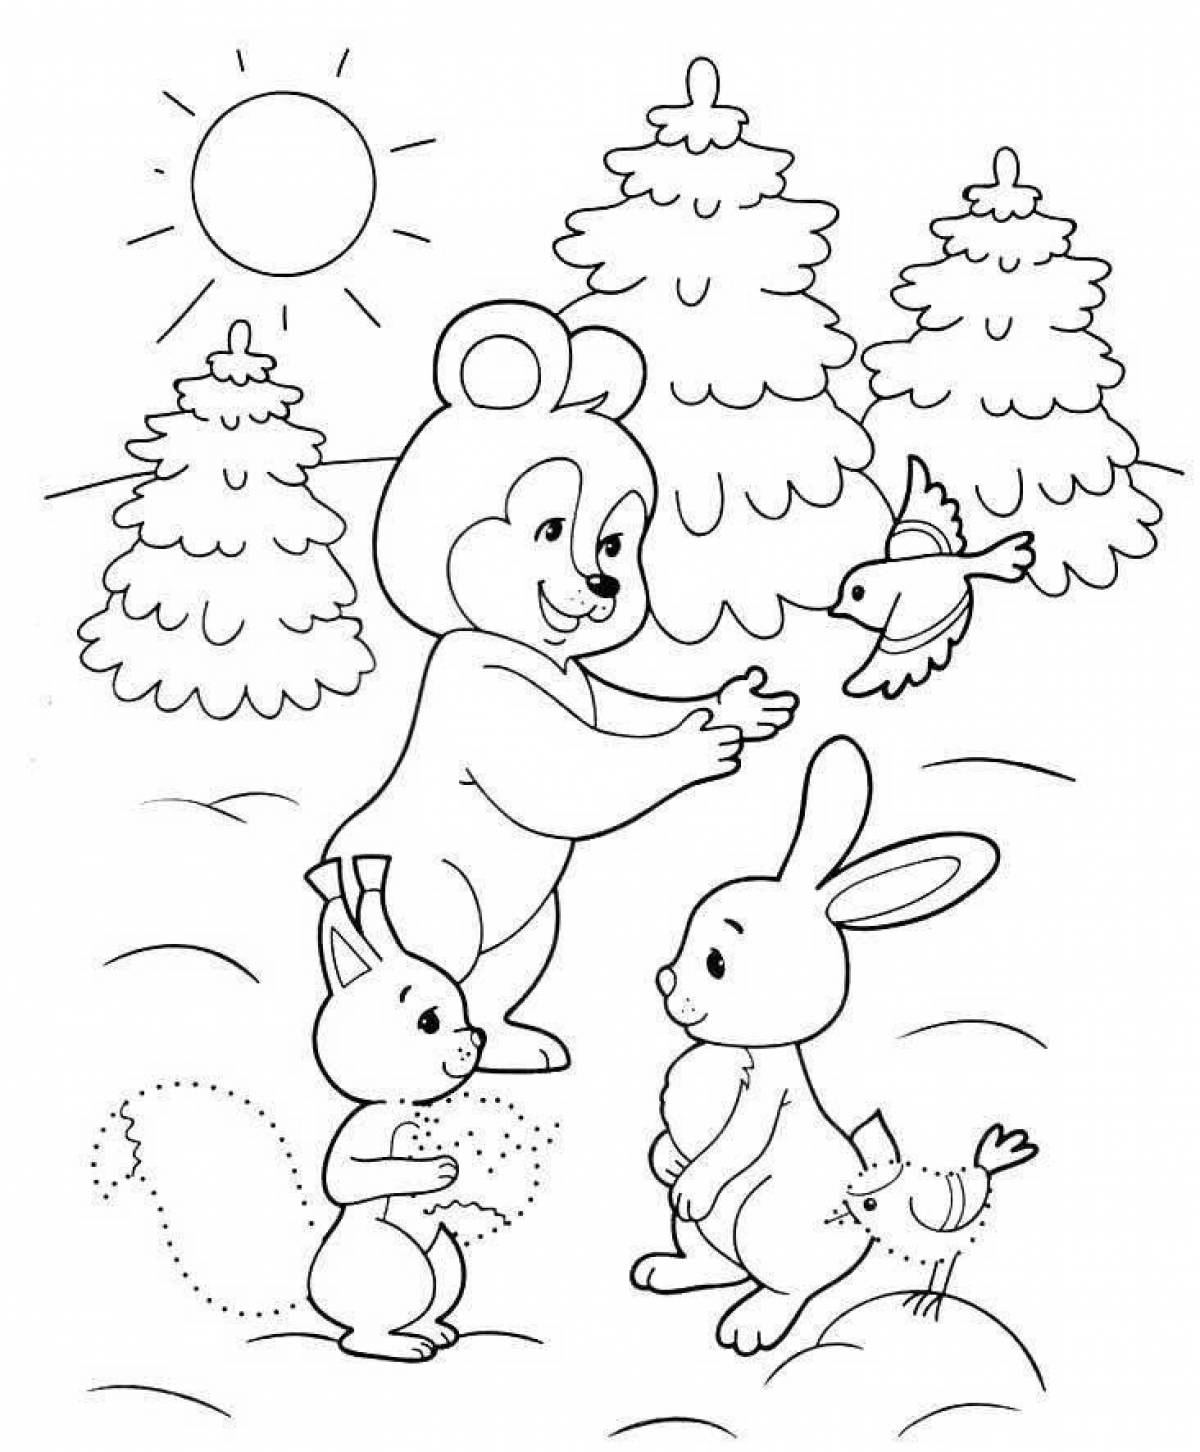 Coloring book cheerful New Year's hare